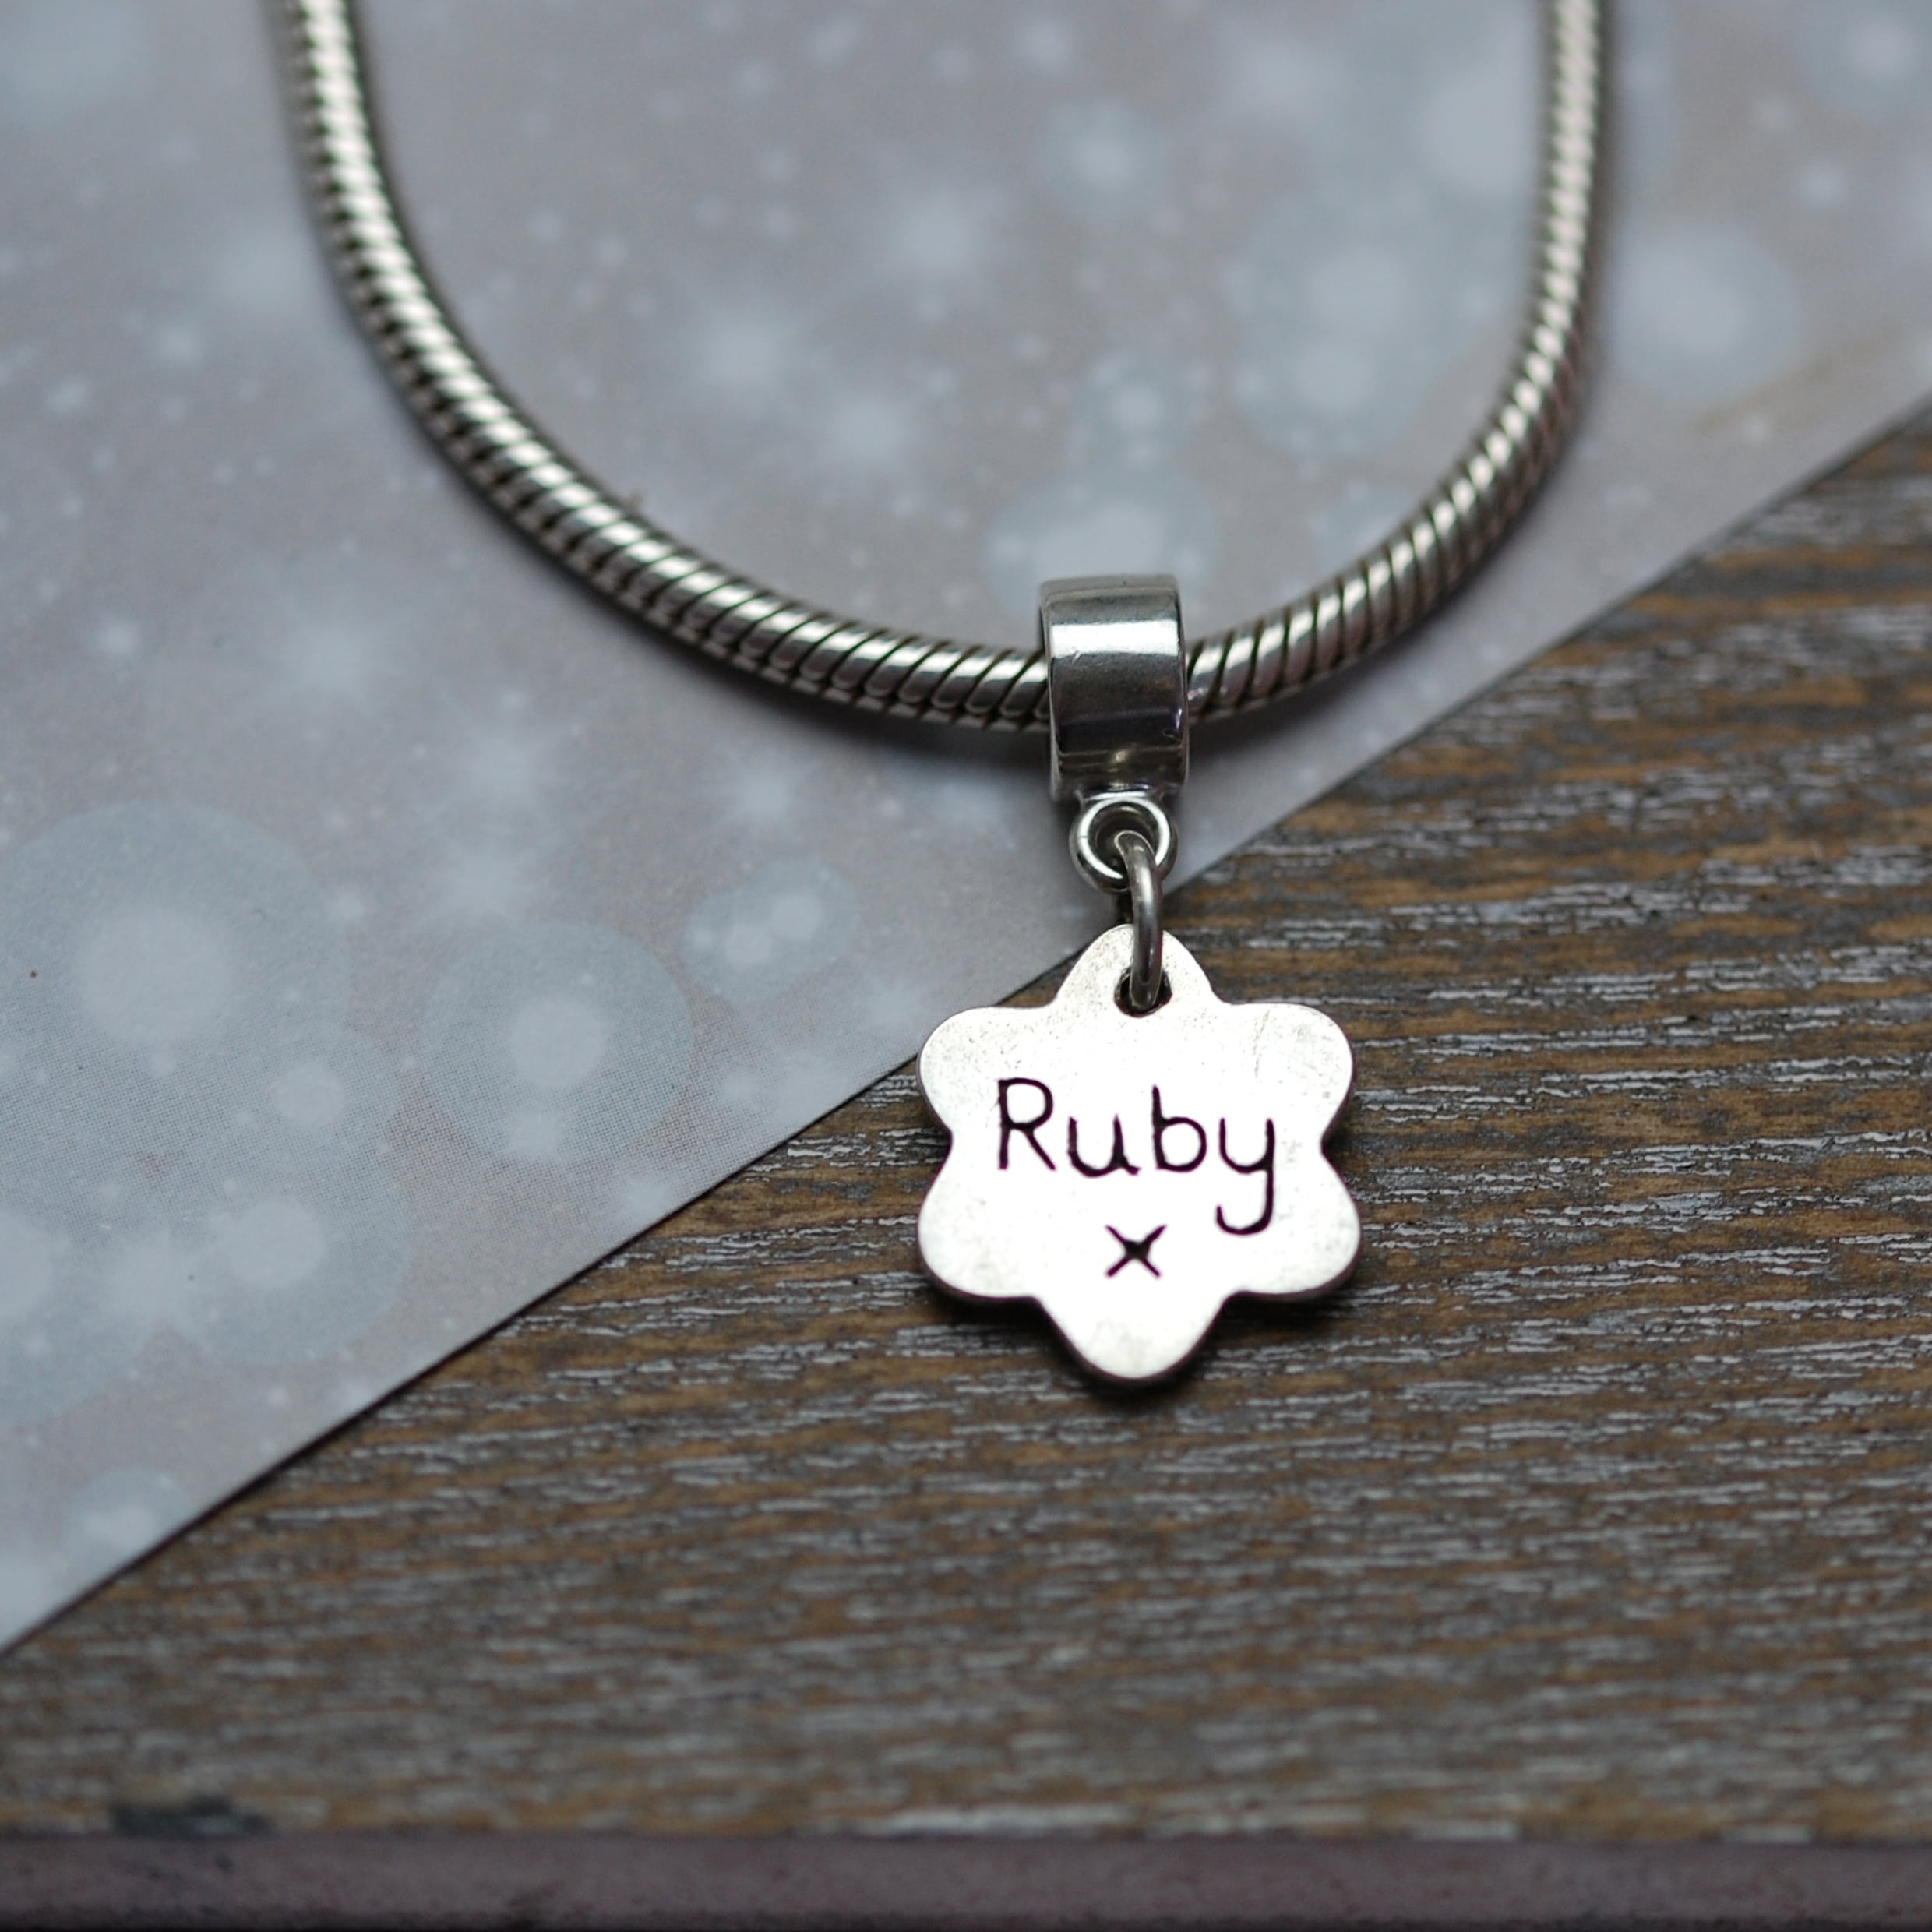 Inscription on the back of raised paw print charm